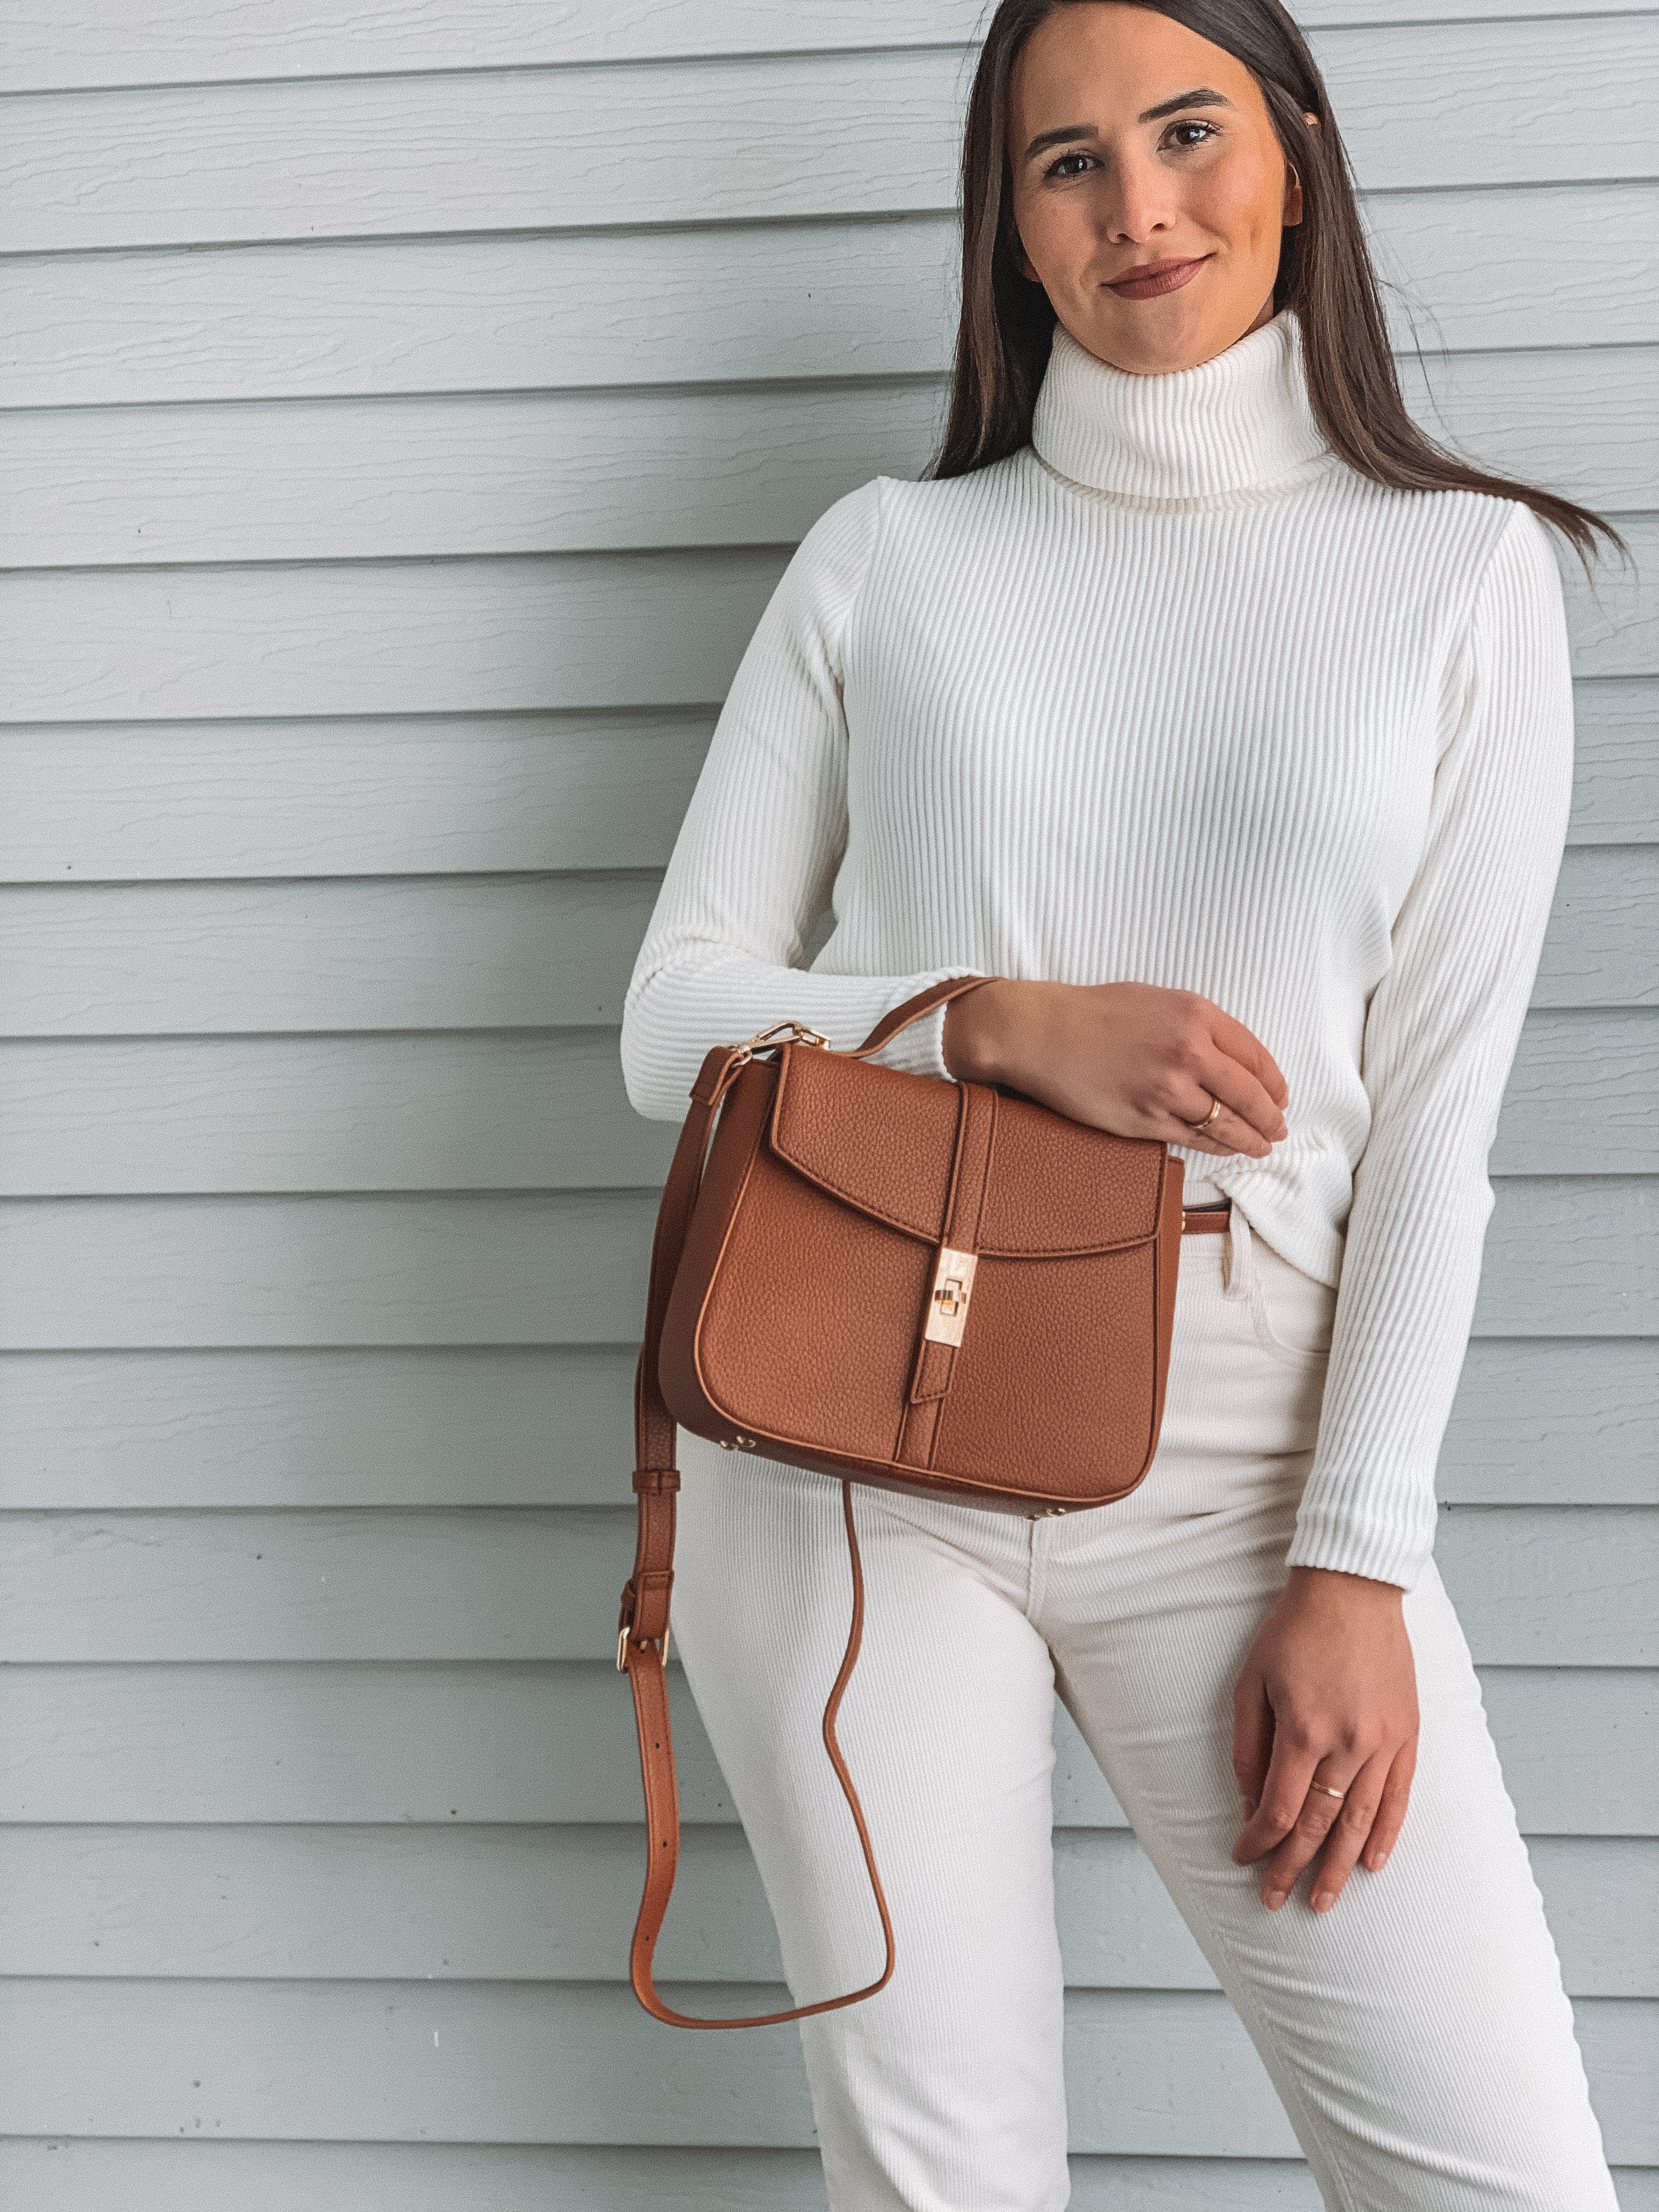 Winter White Sweater and Corduroy pants with Camel purse